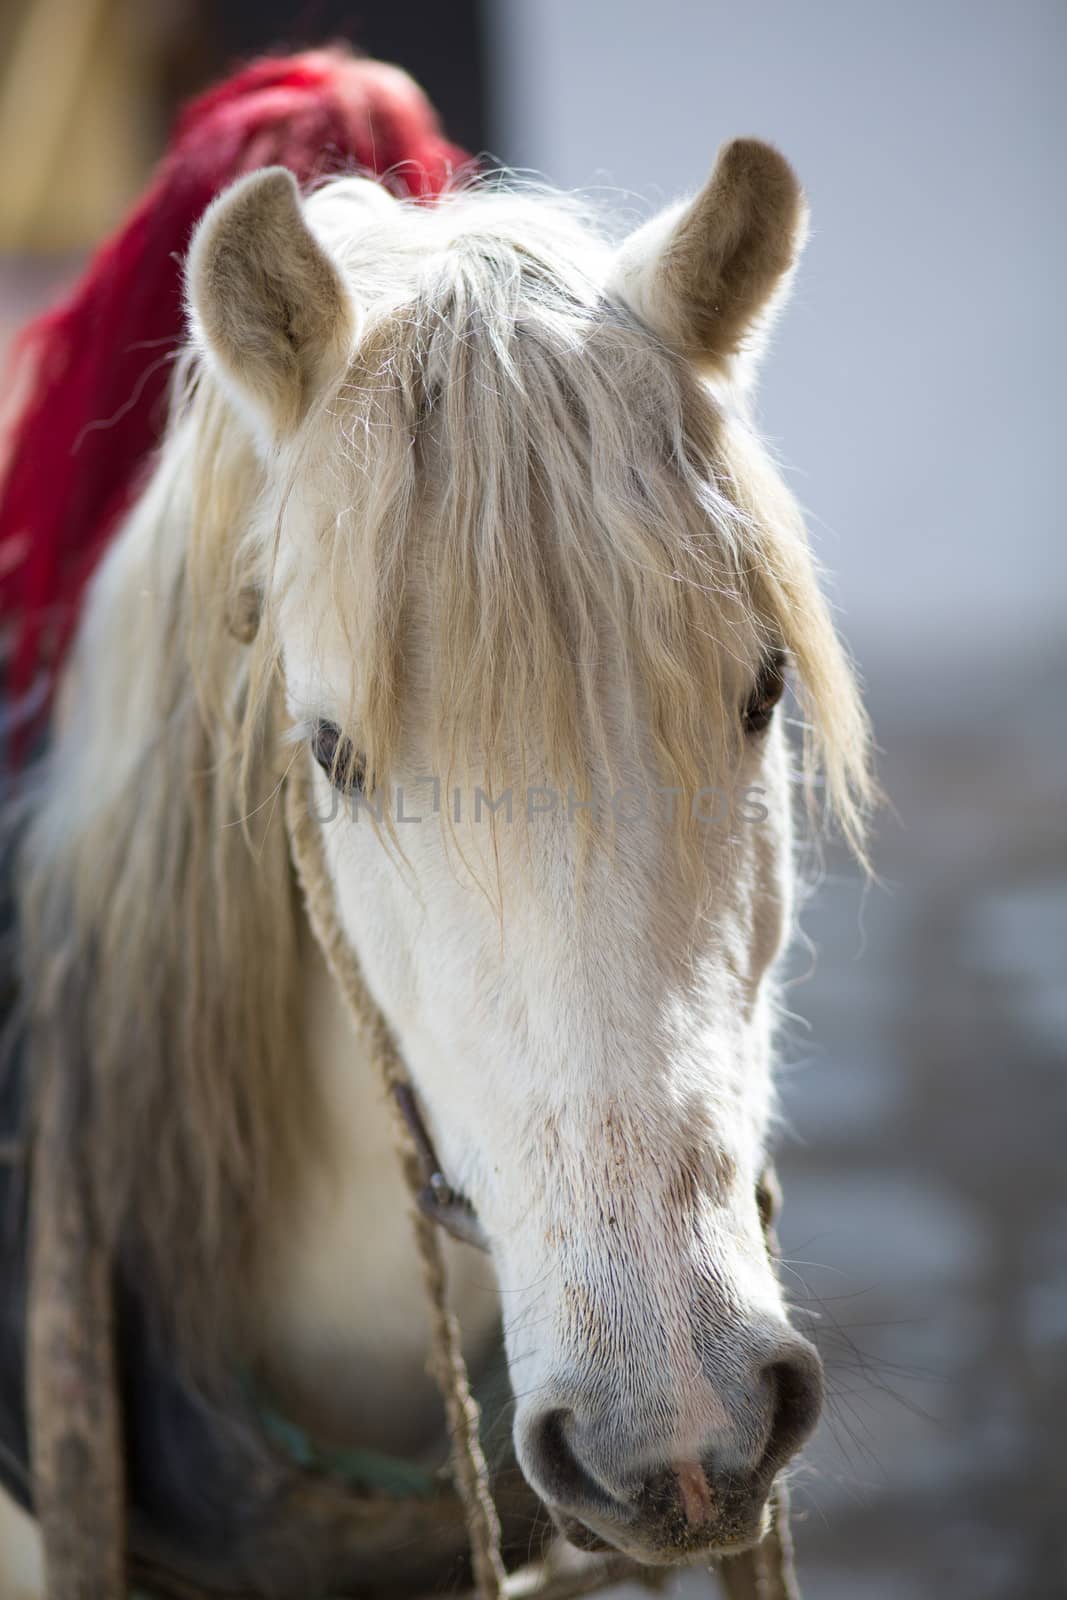 Horse head with blurred background in TIbet